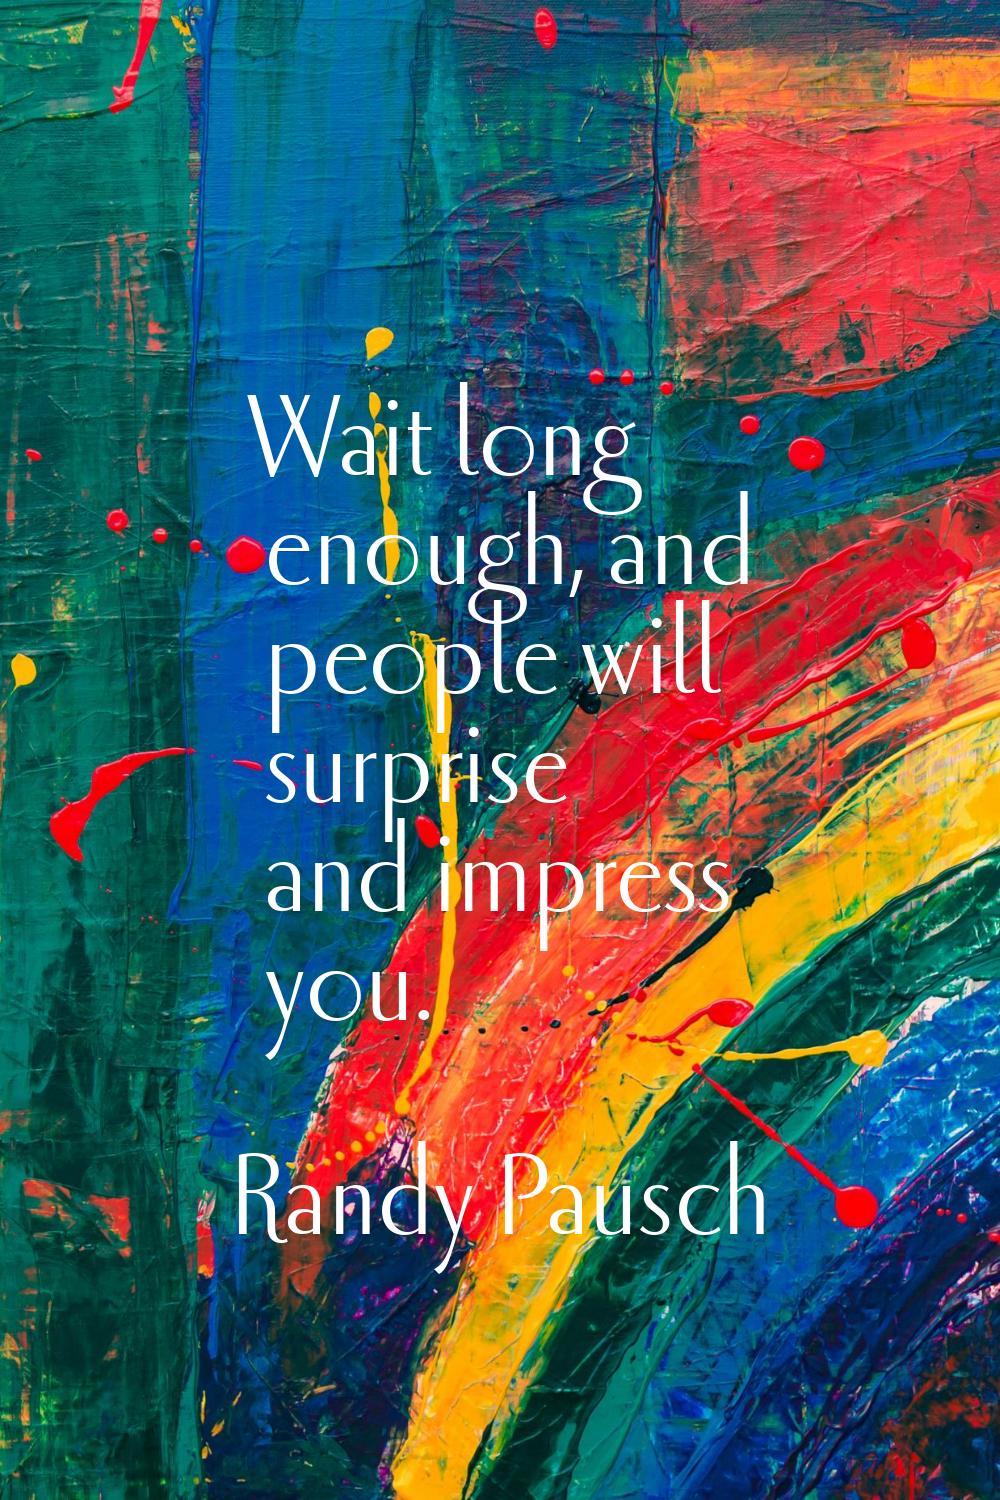 Wait long enough, and people will surprise and impress you.